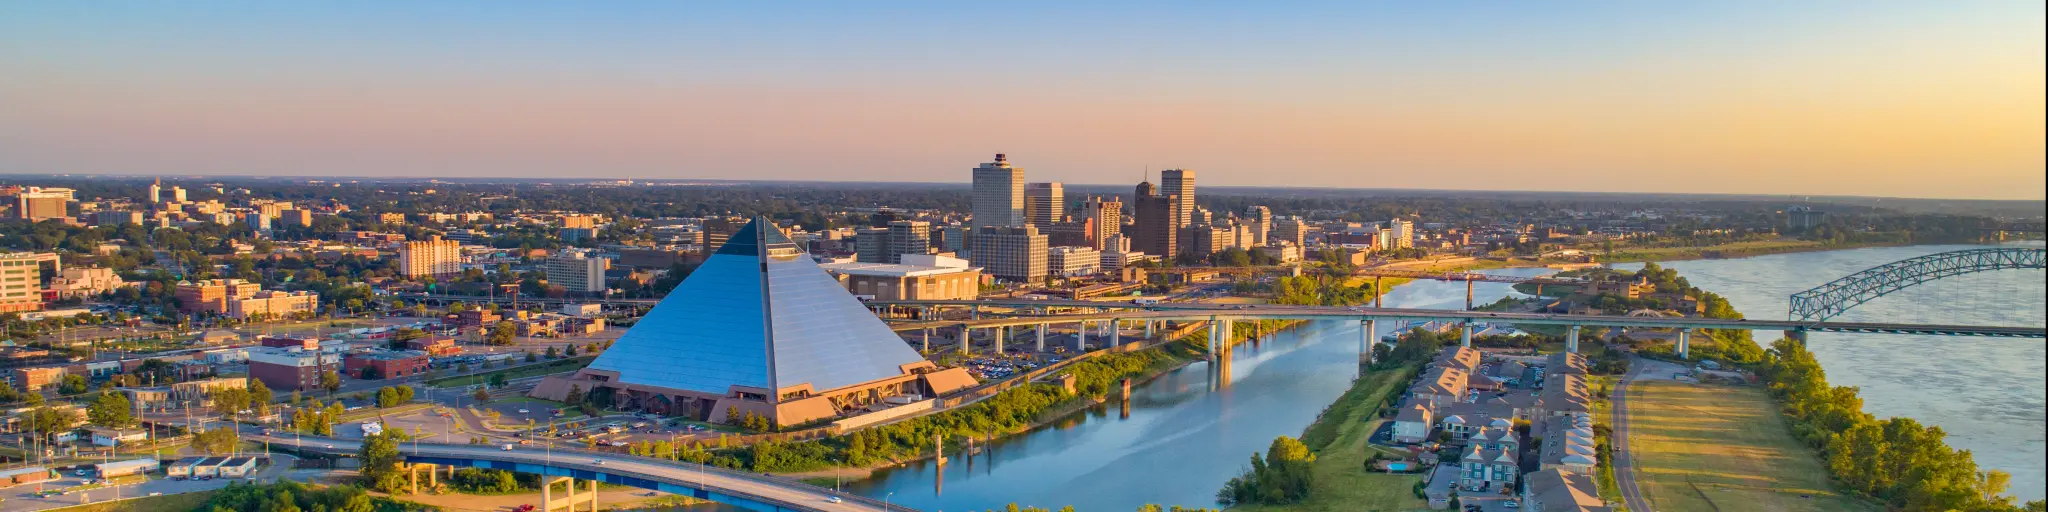 View of the city skyline of Memphis, Tennessee and the Mississippi river on a beautiful morning